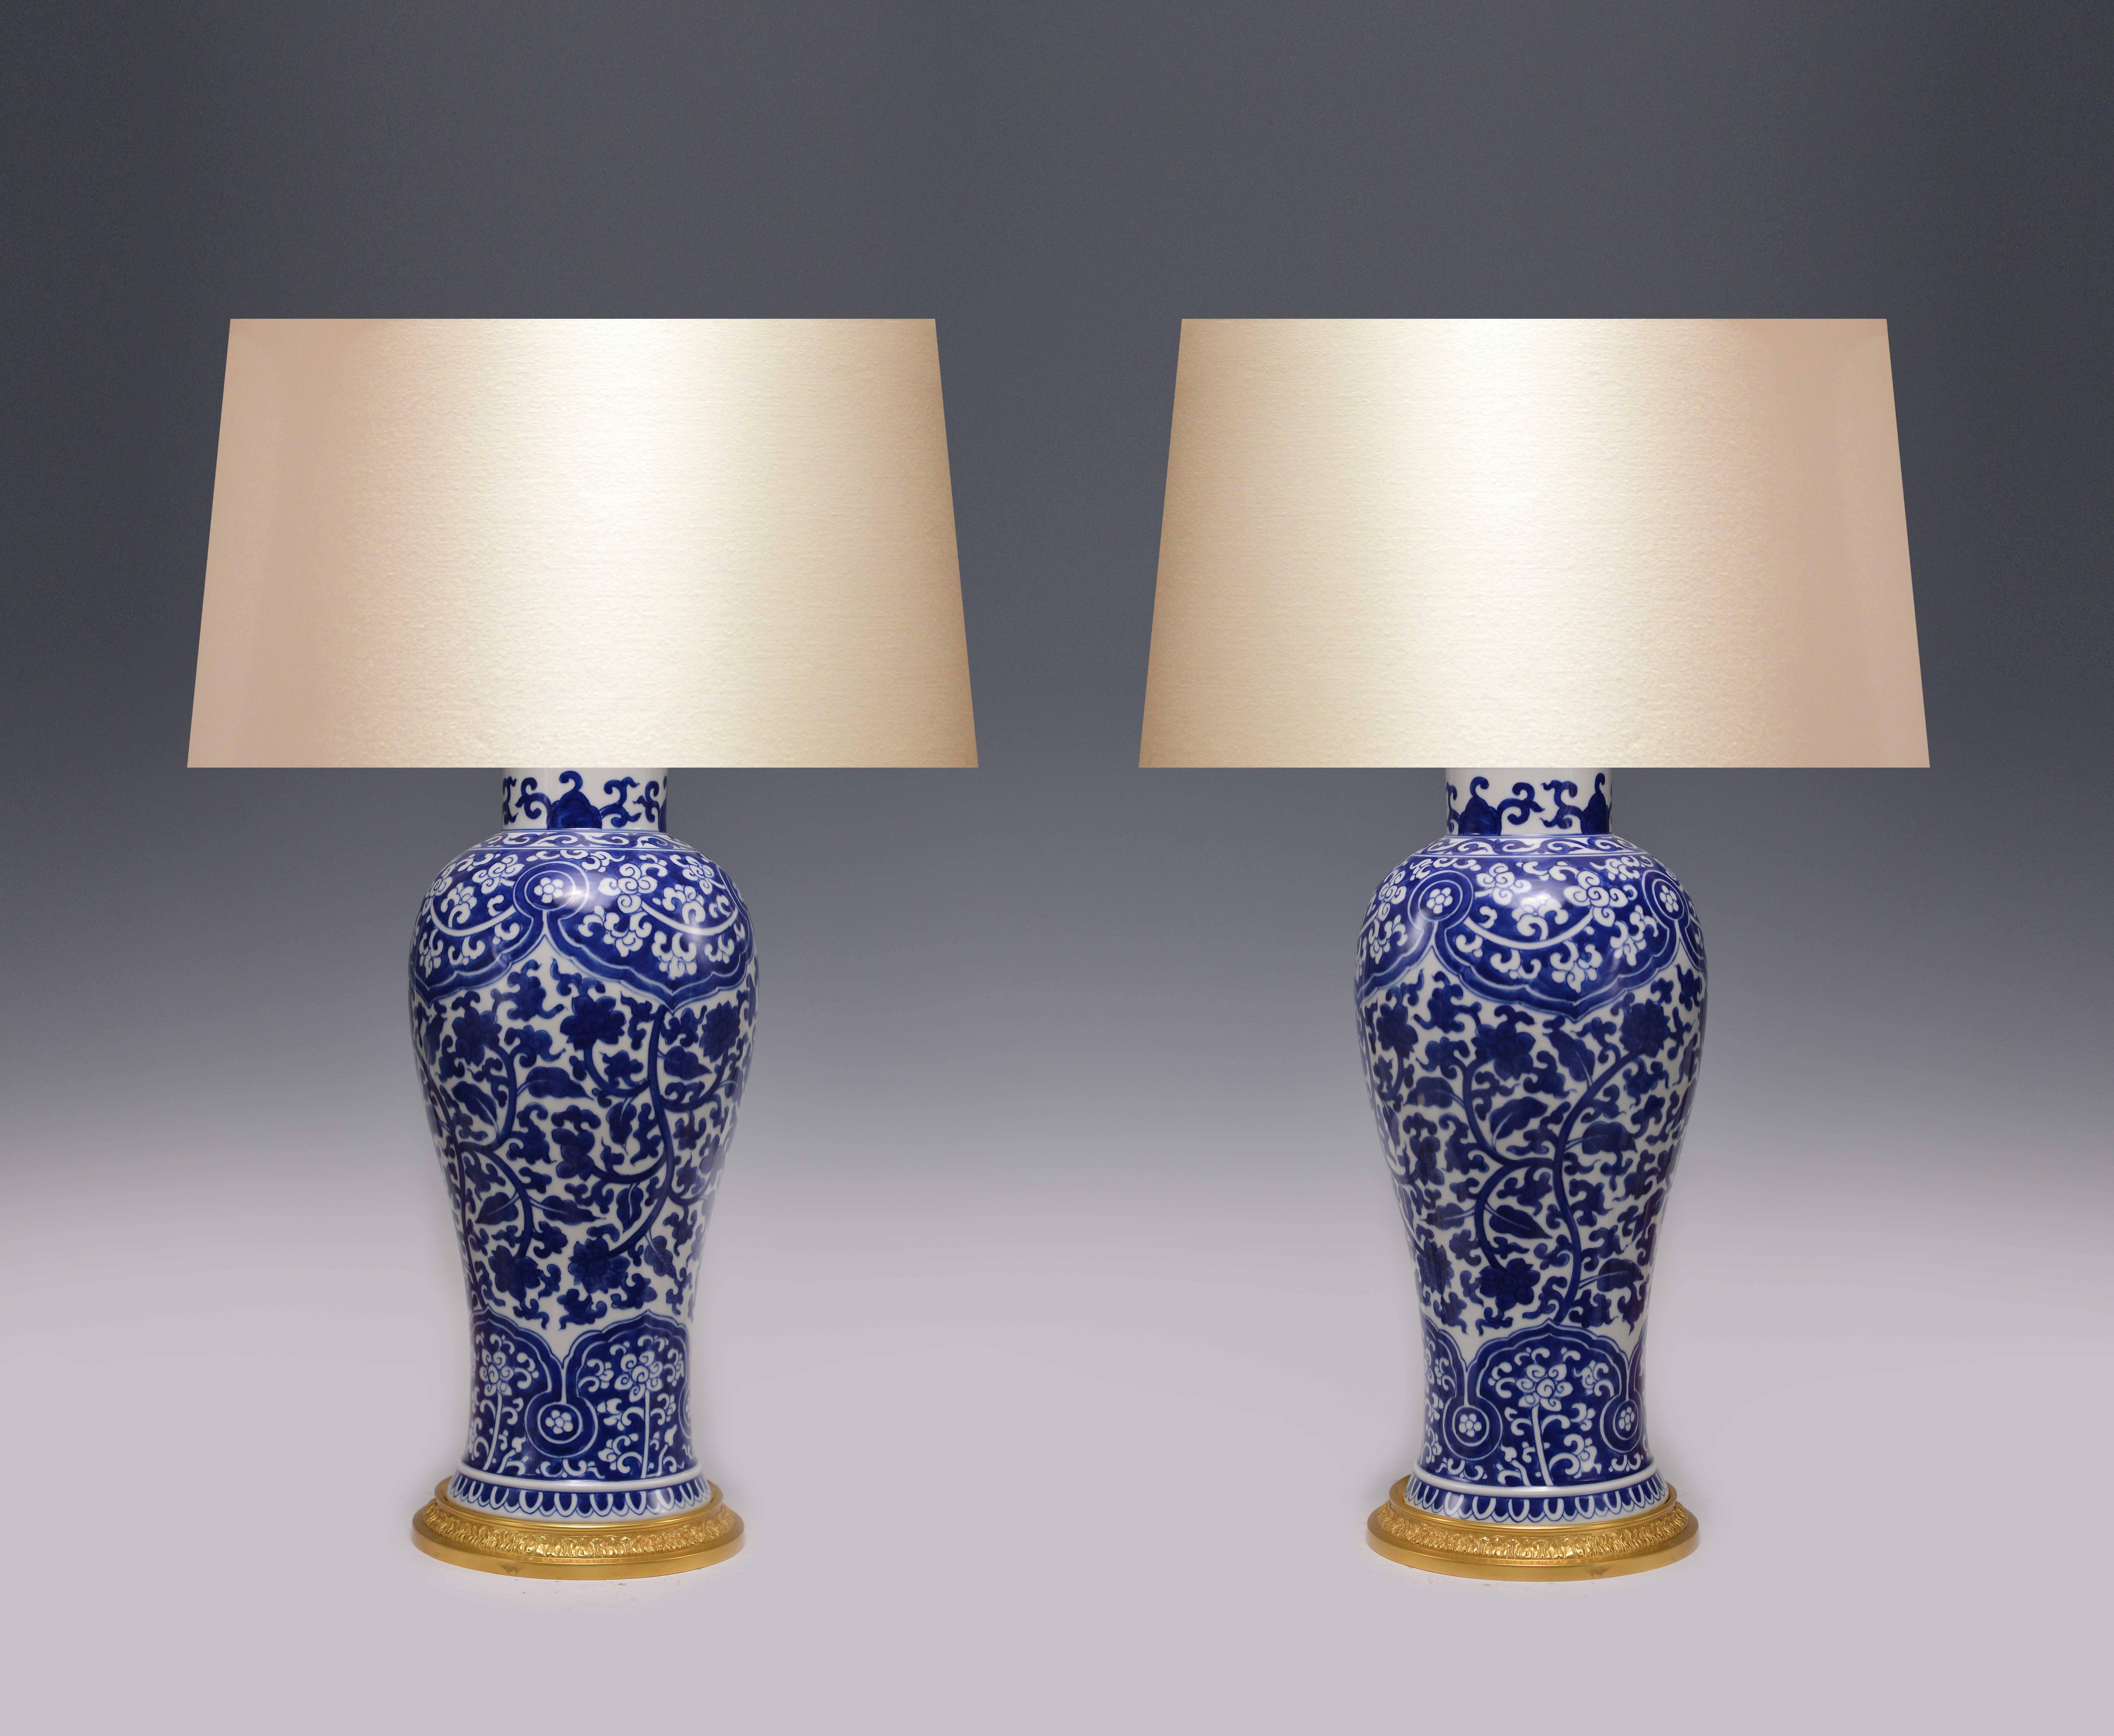 Fine painted blue and white porcelain vases with brass bases, mounted as lamps.
(Lampshade not included)